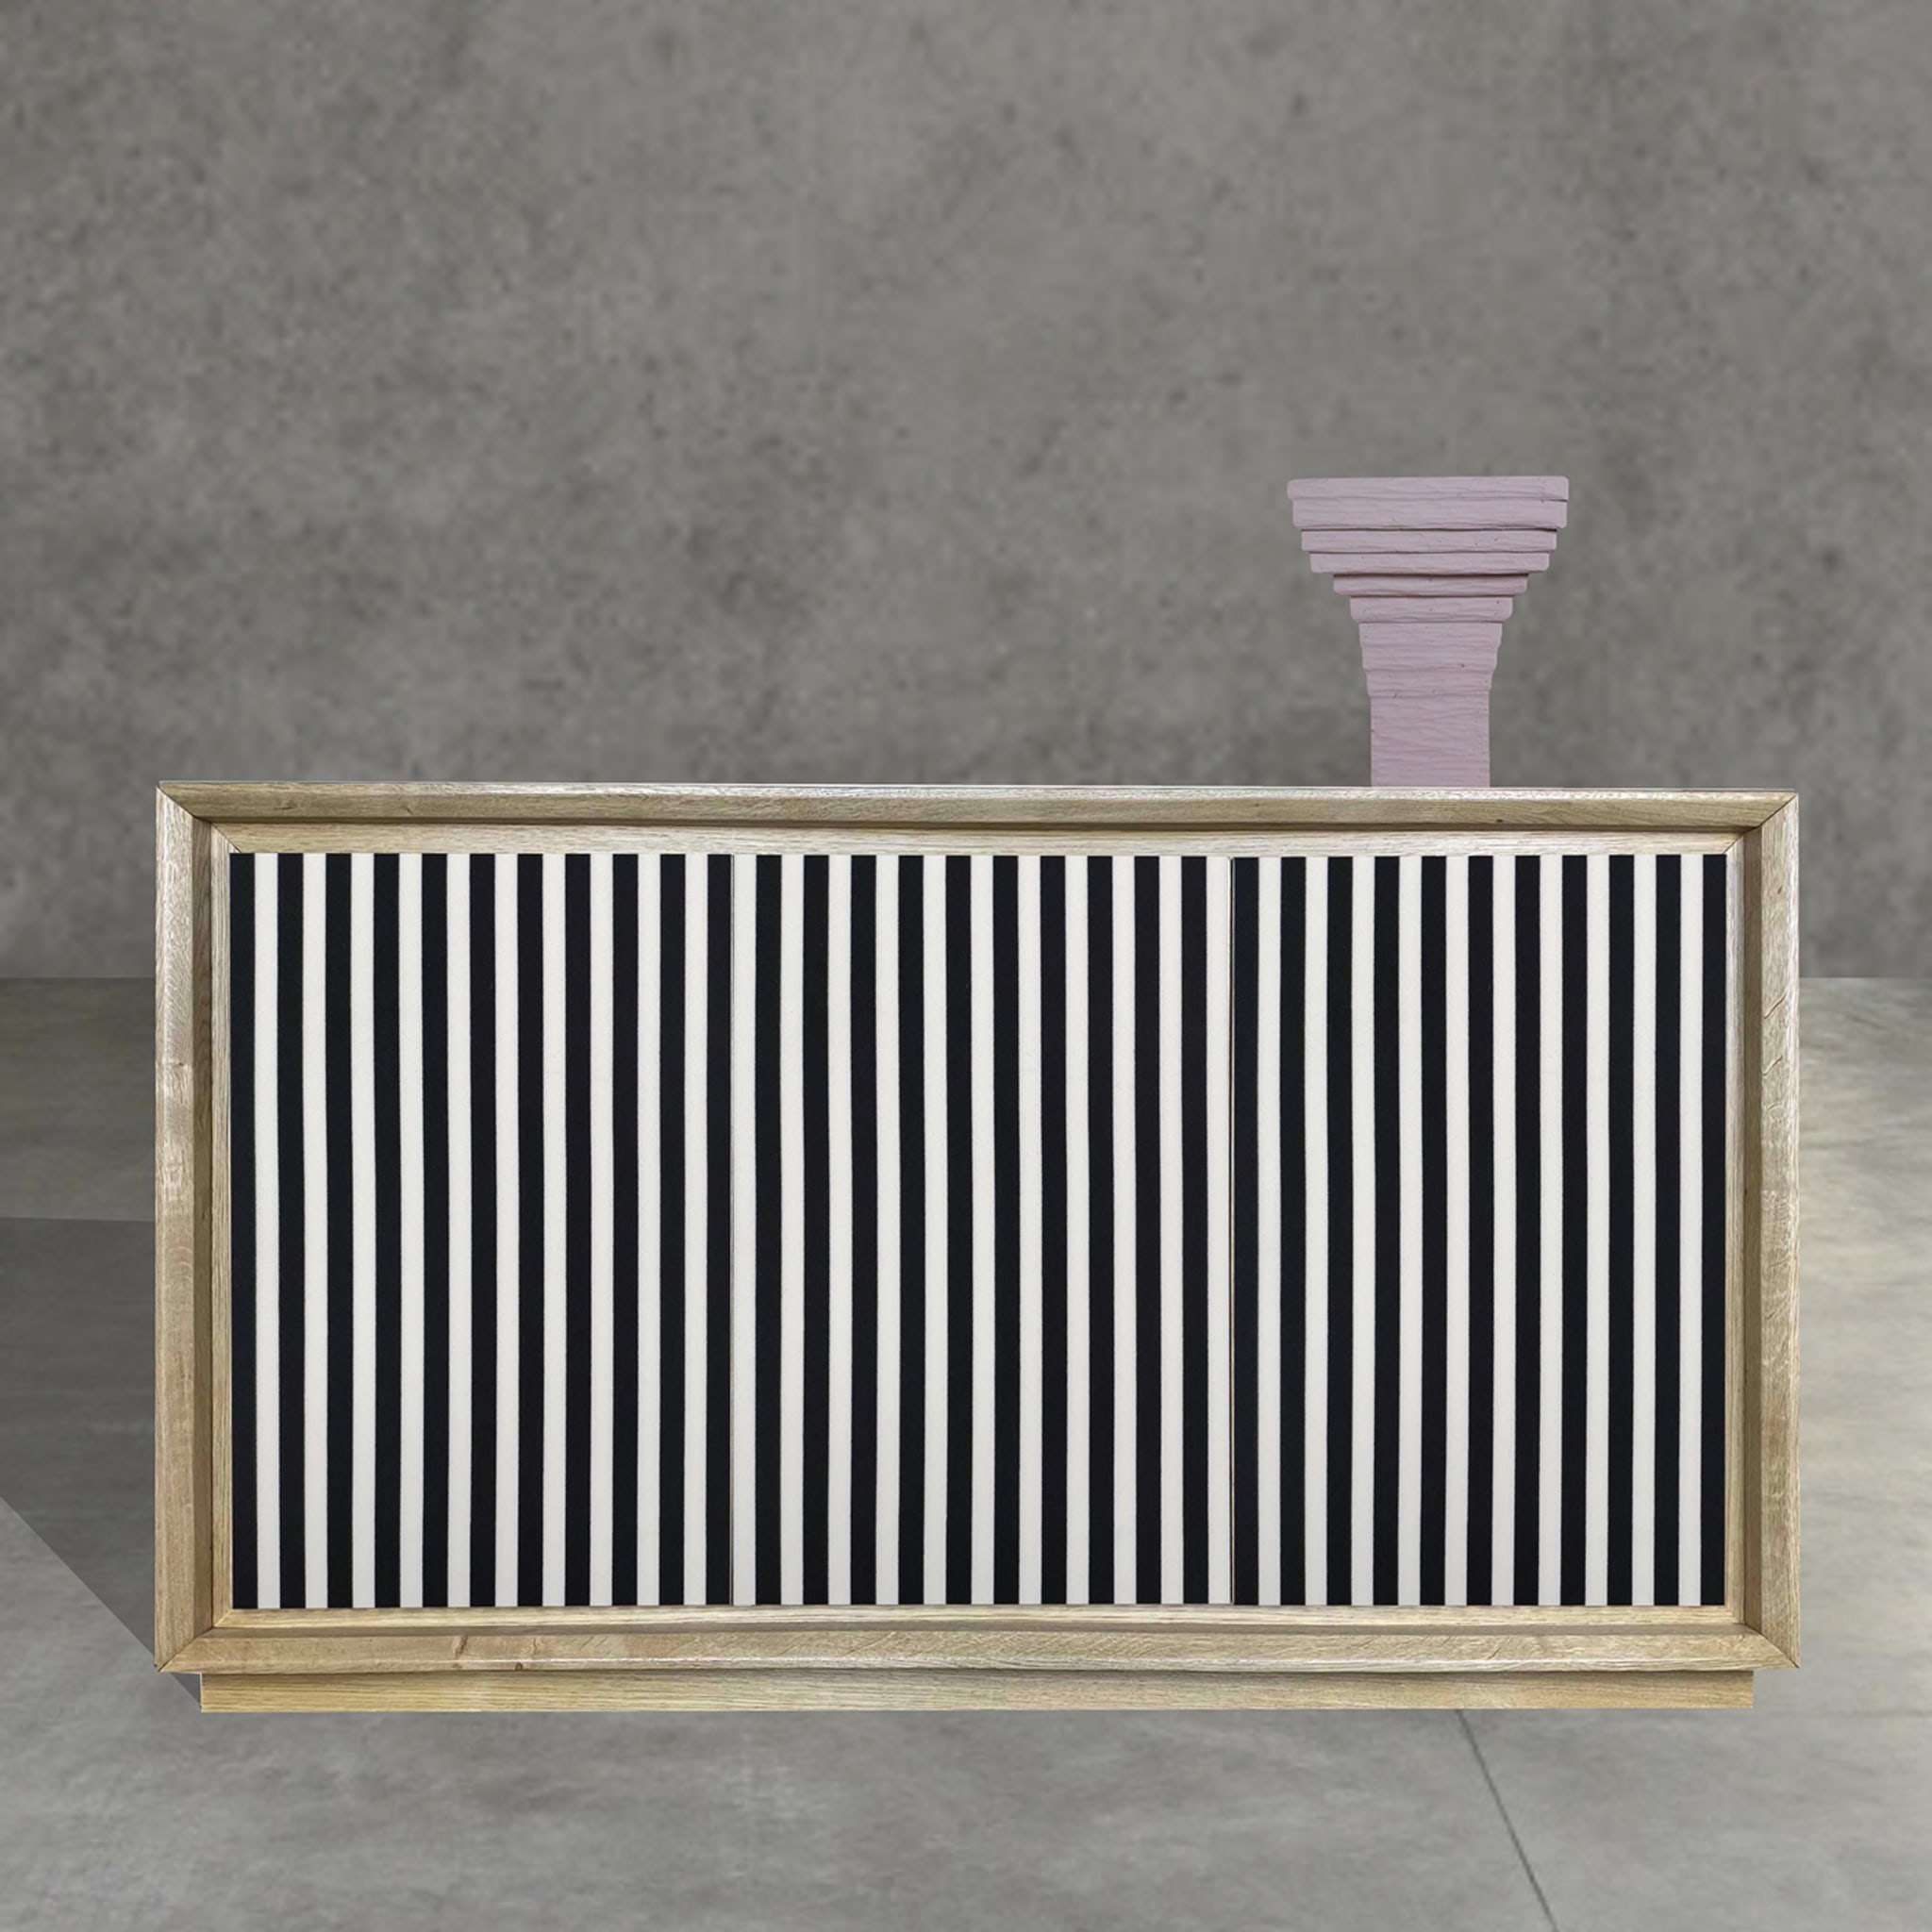 Fuga Strisce Due 3-Door Black-And-White Sideboard by M. Meccani - Alternative view 1